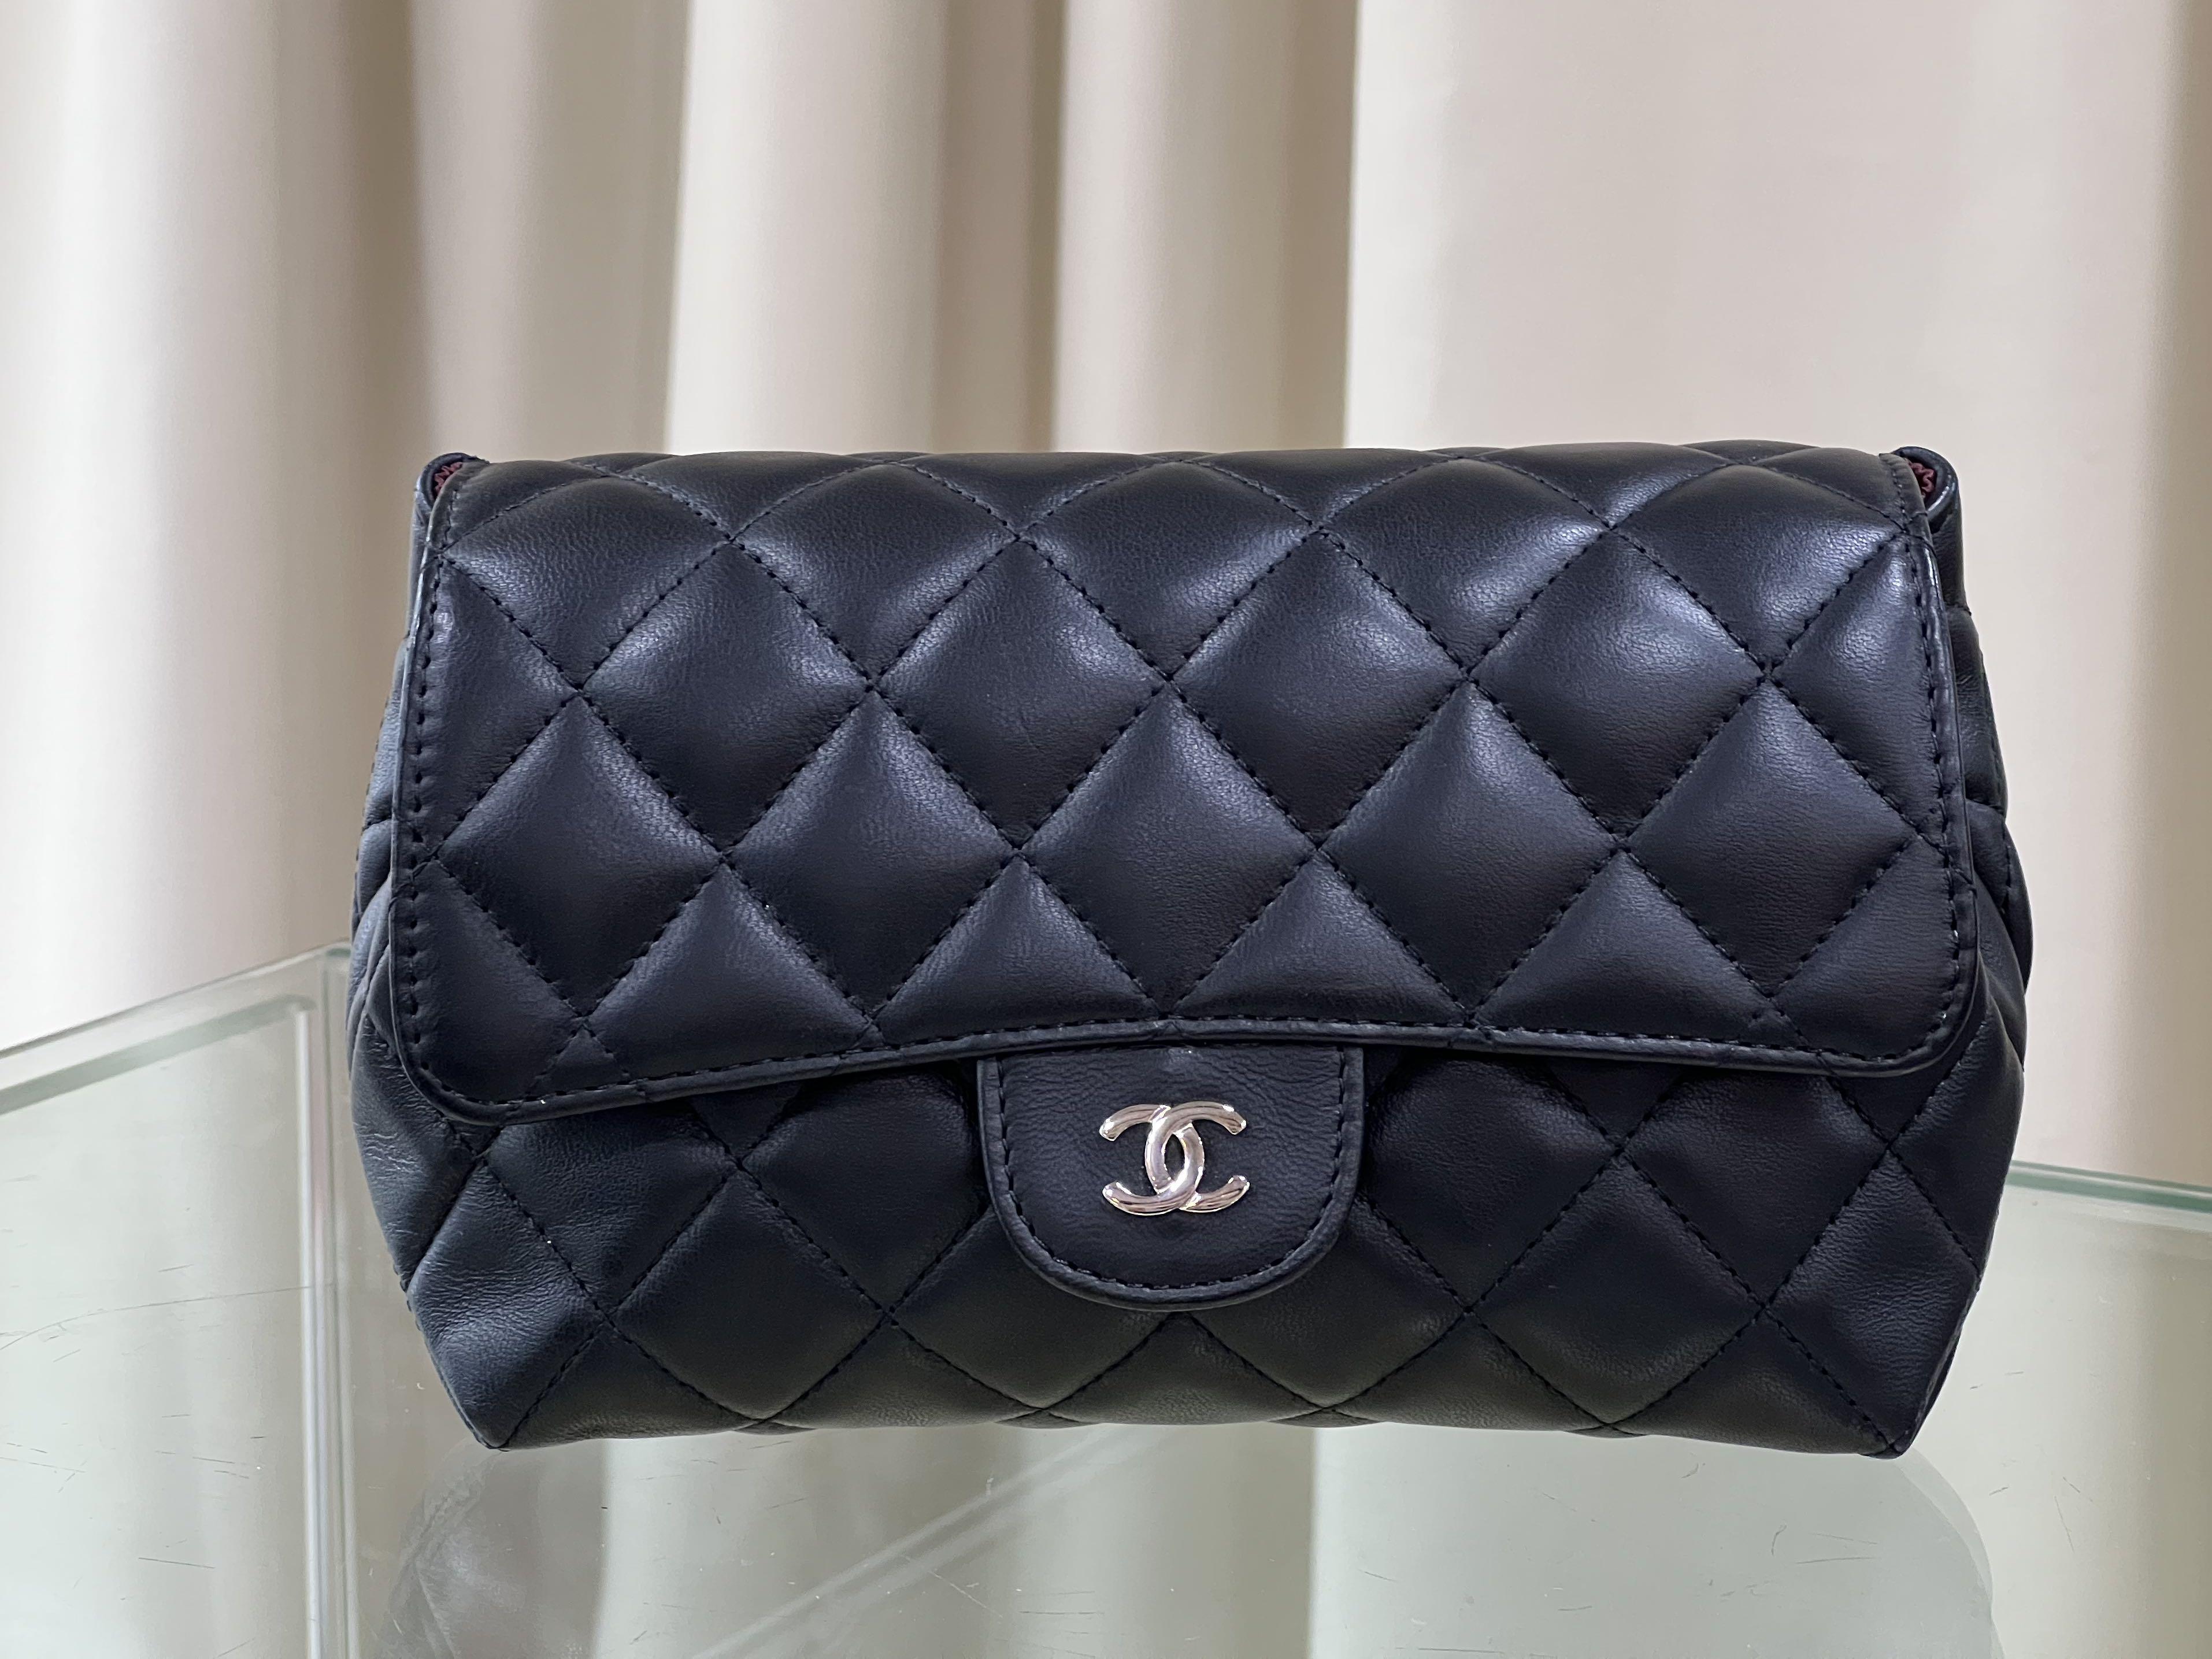 CHANEL. Smooth quilted parma leather bag, zipper closure…